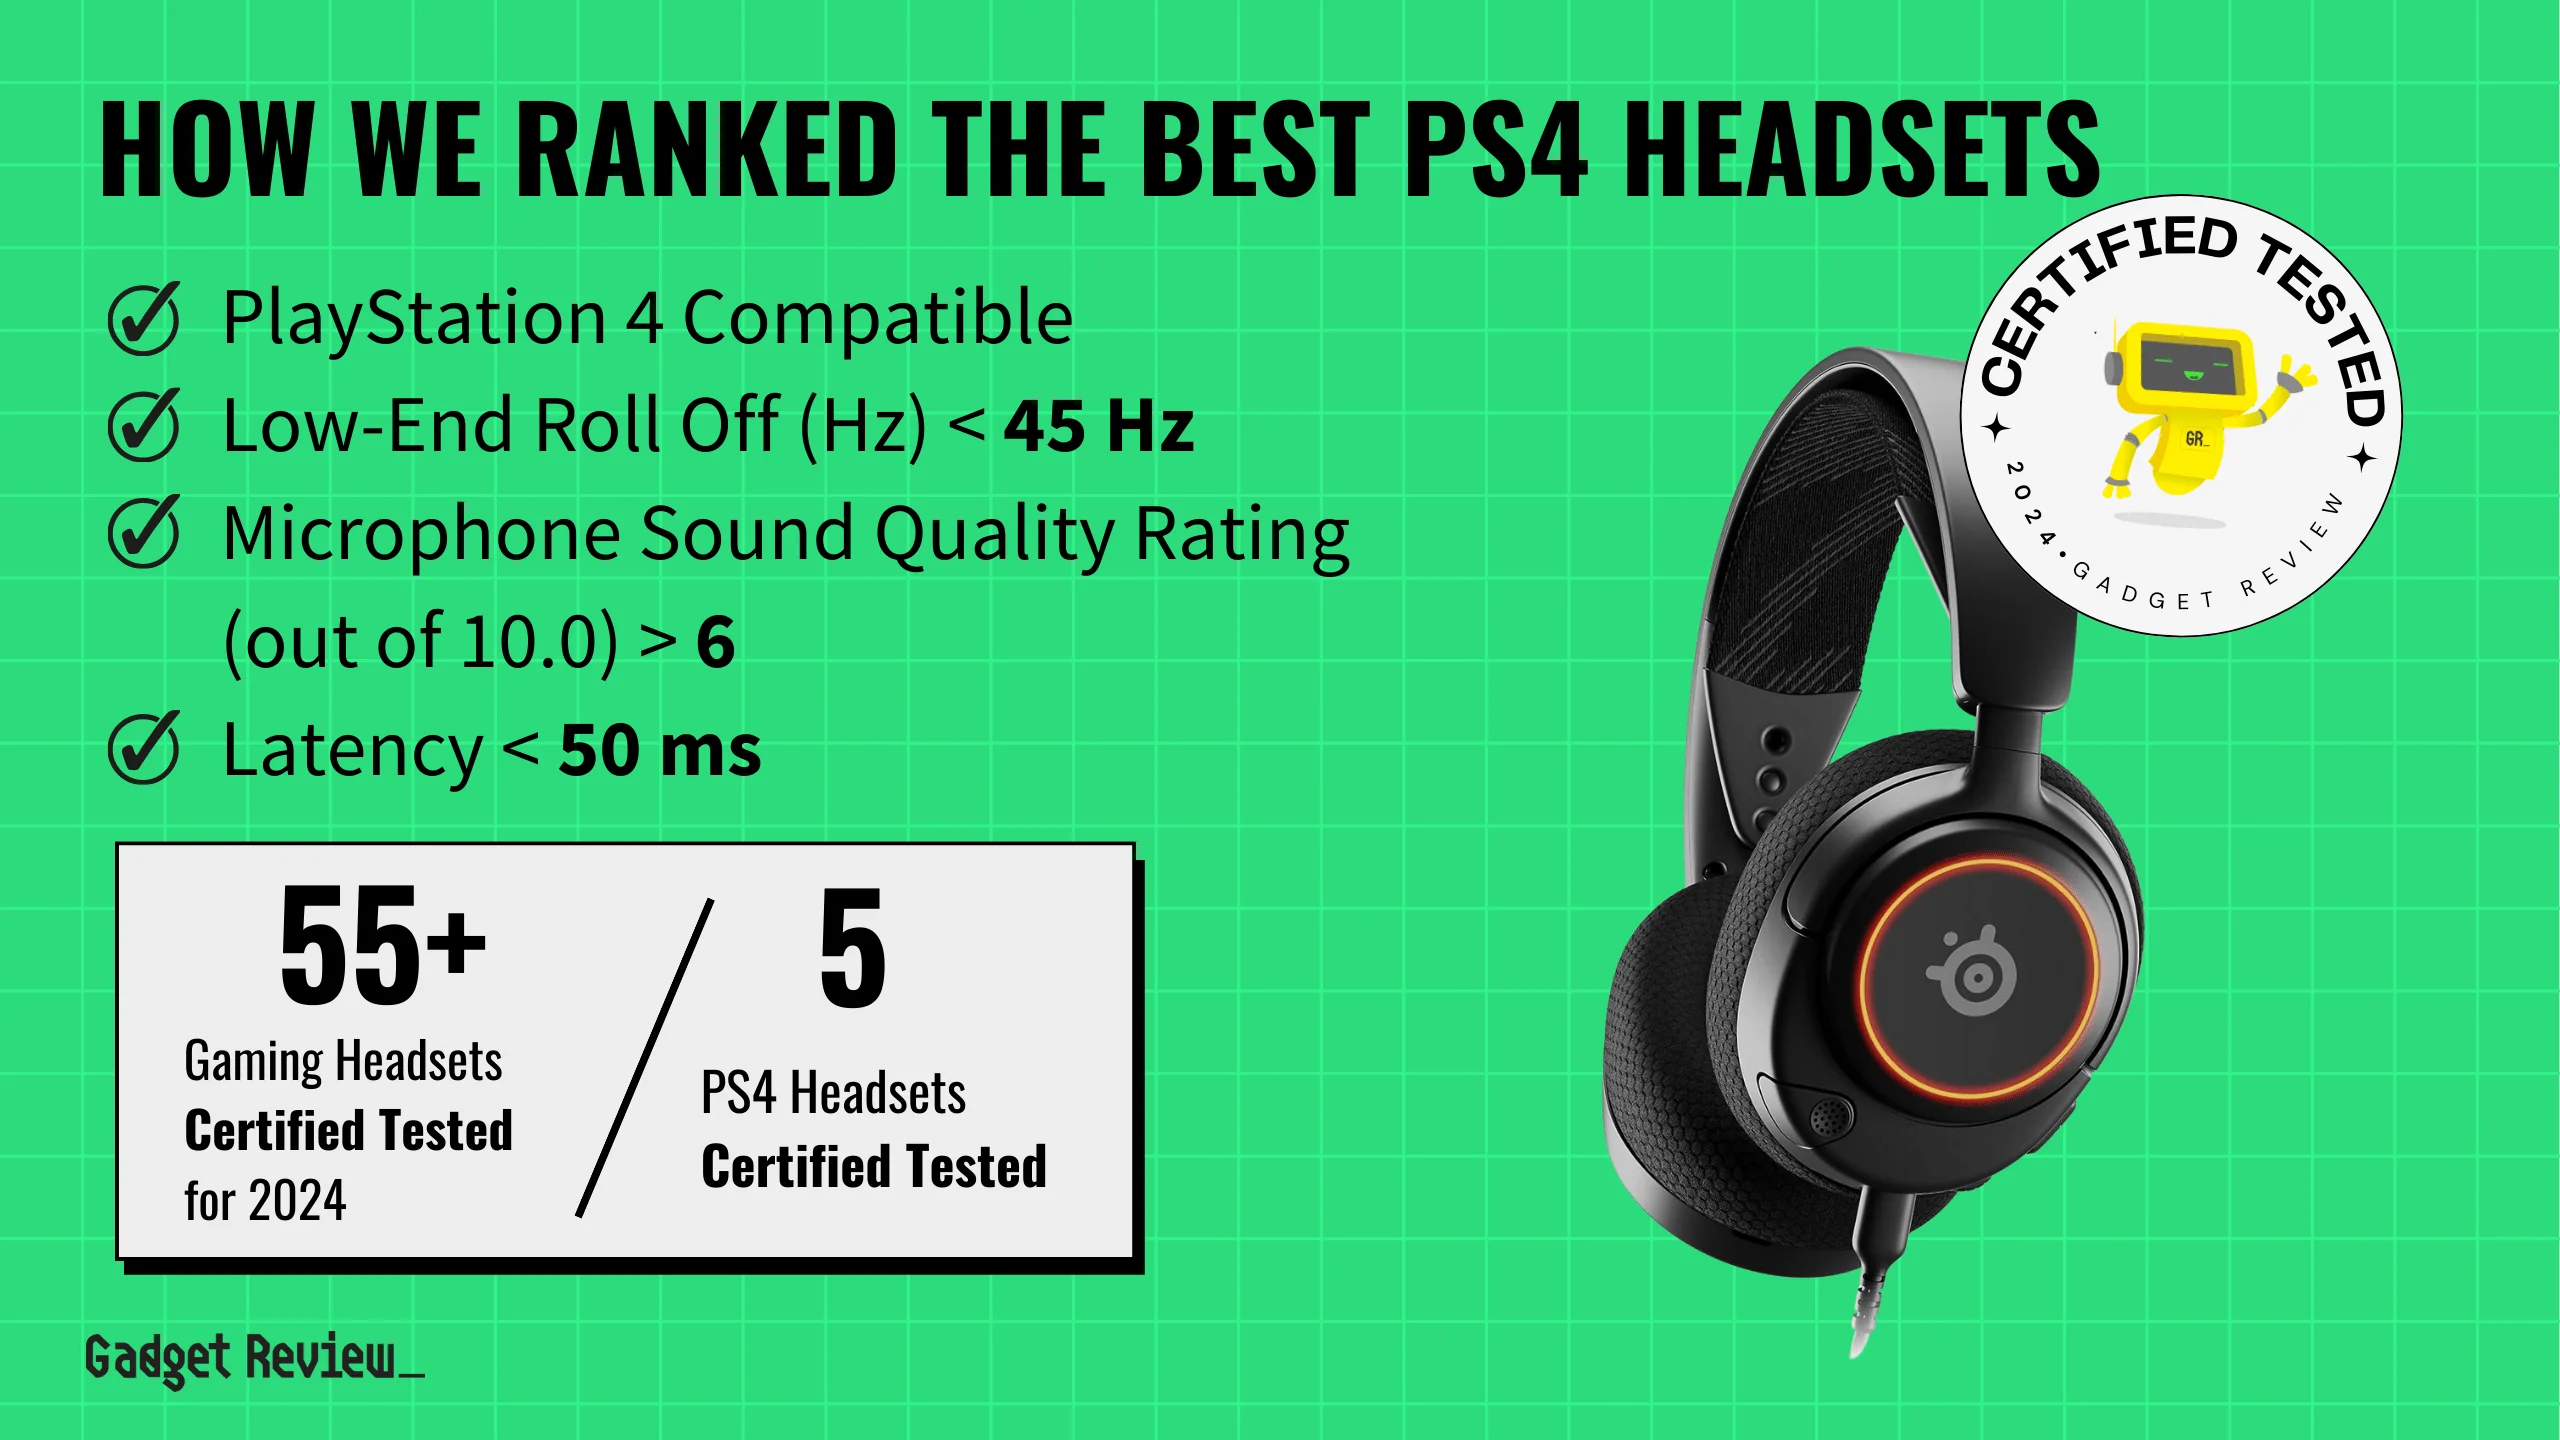 best ps4 headset guide that shows the top best gaming headset model